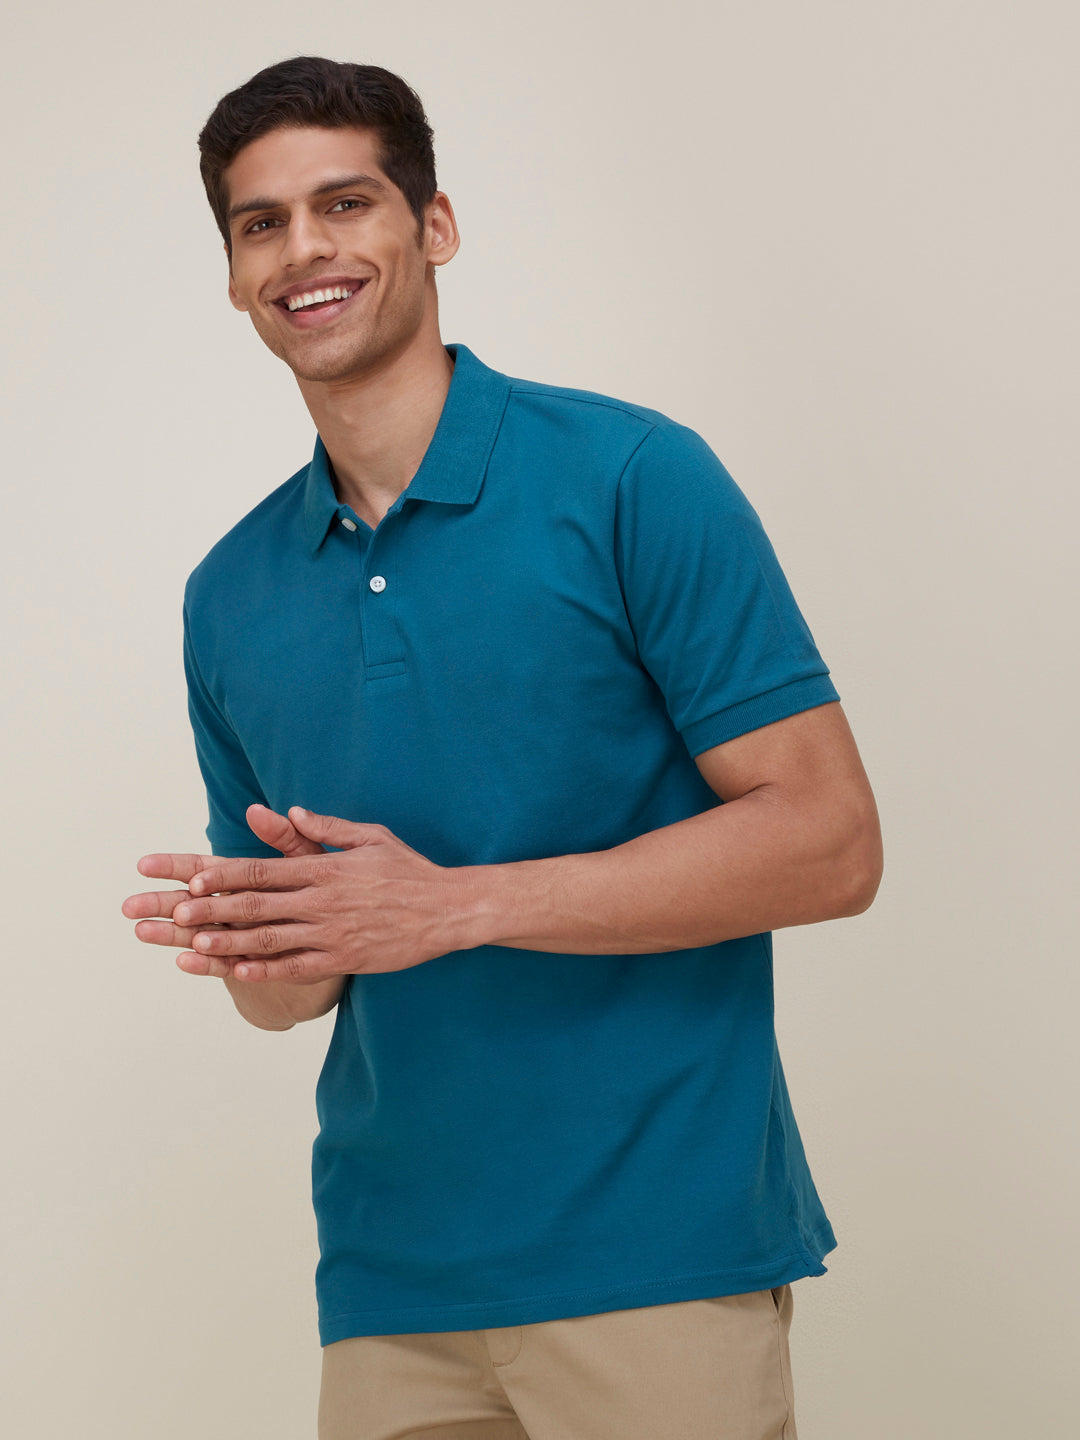 WES Casuals Teal Slim-Fit Polo T-Shirt | Teal Slim-Fit Polo T-Shirt for Men Front View - Westside